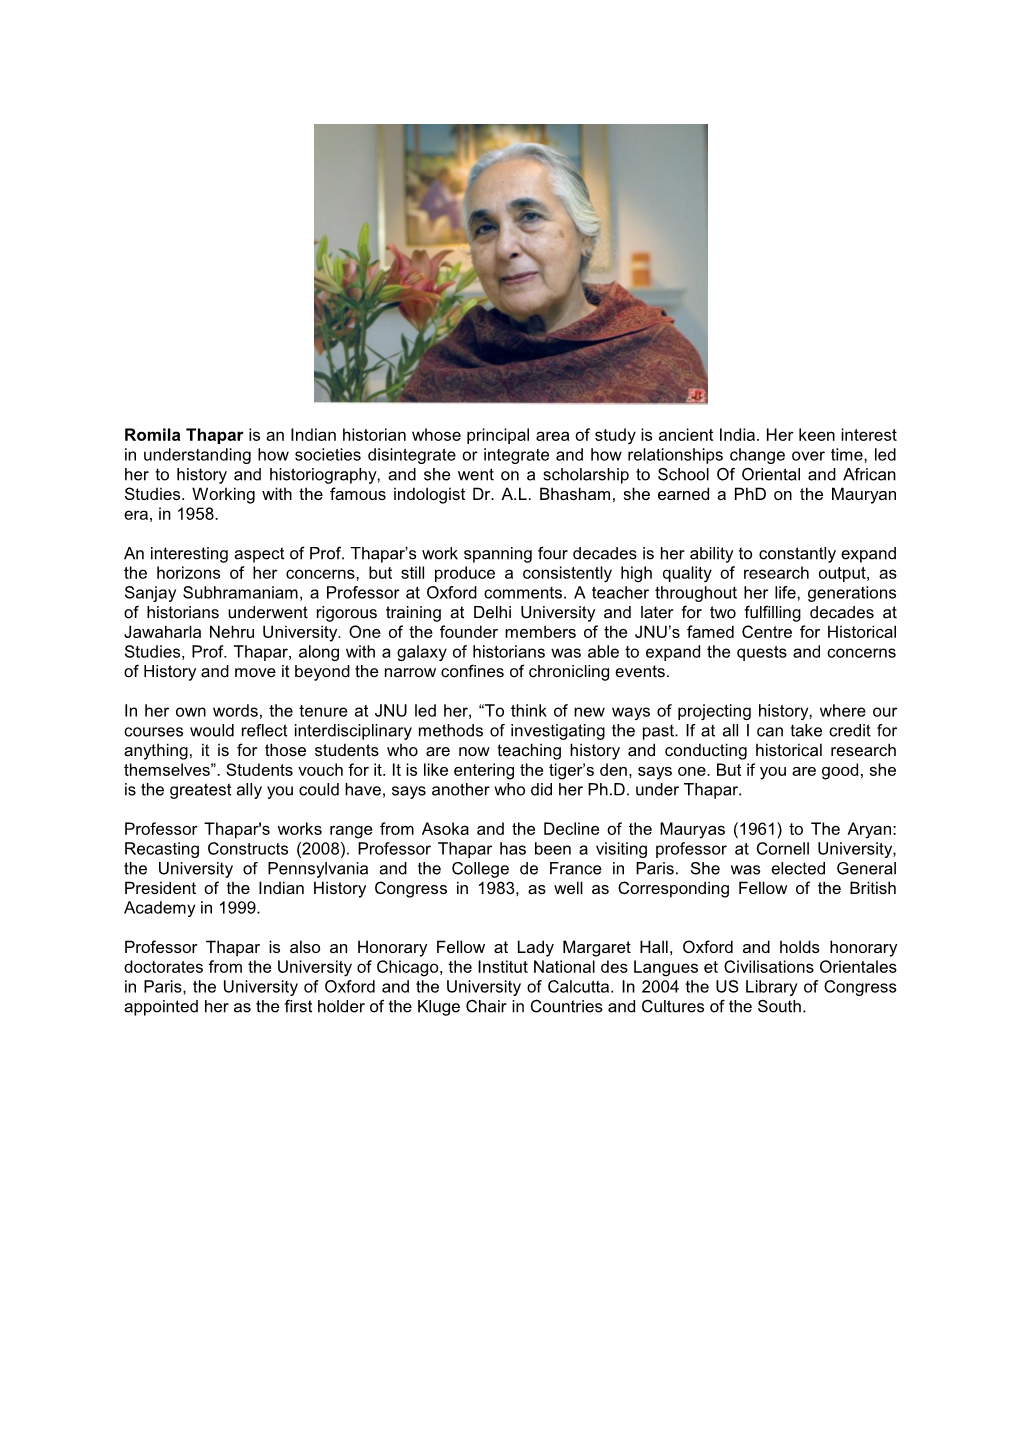 Romila Thapar Is an Indian Historian Whose Principal Area of Study Is Ancient India